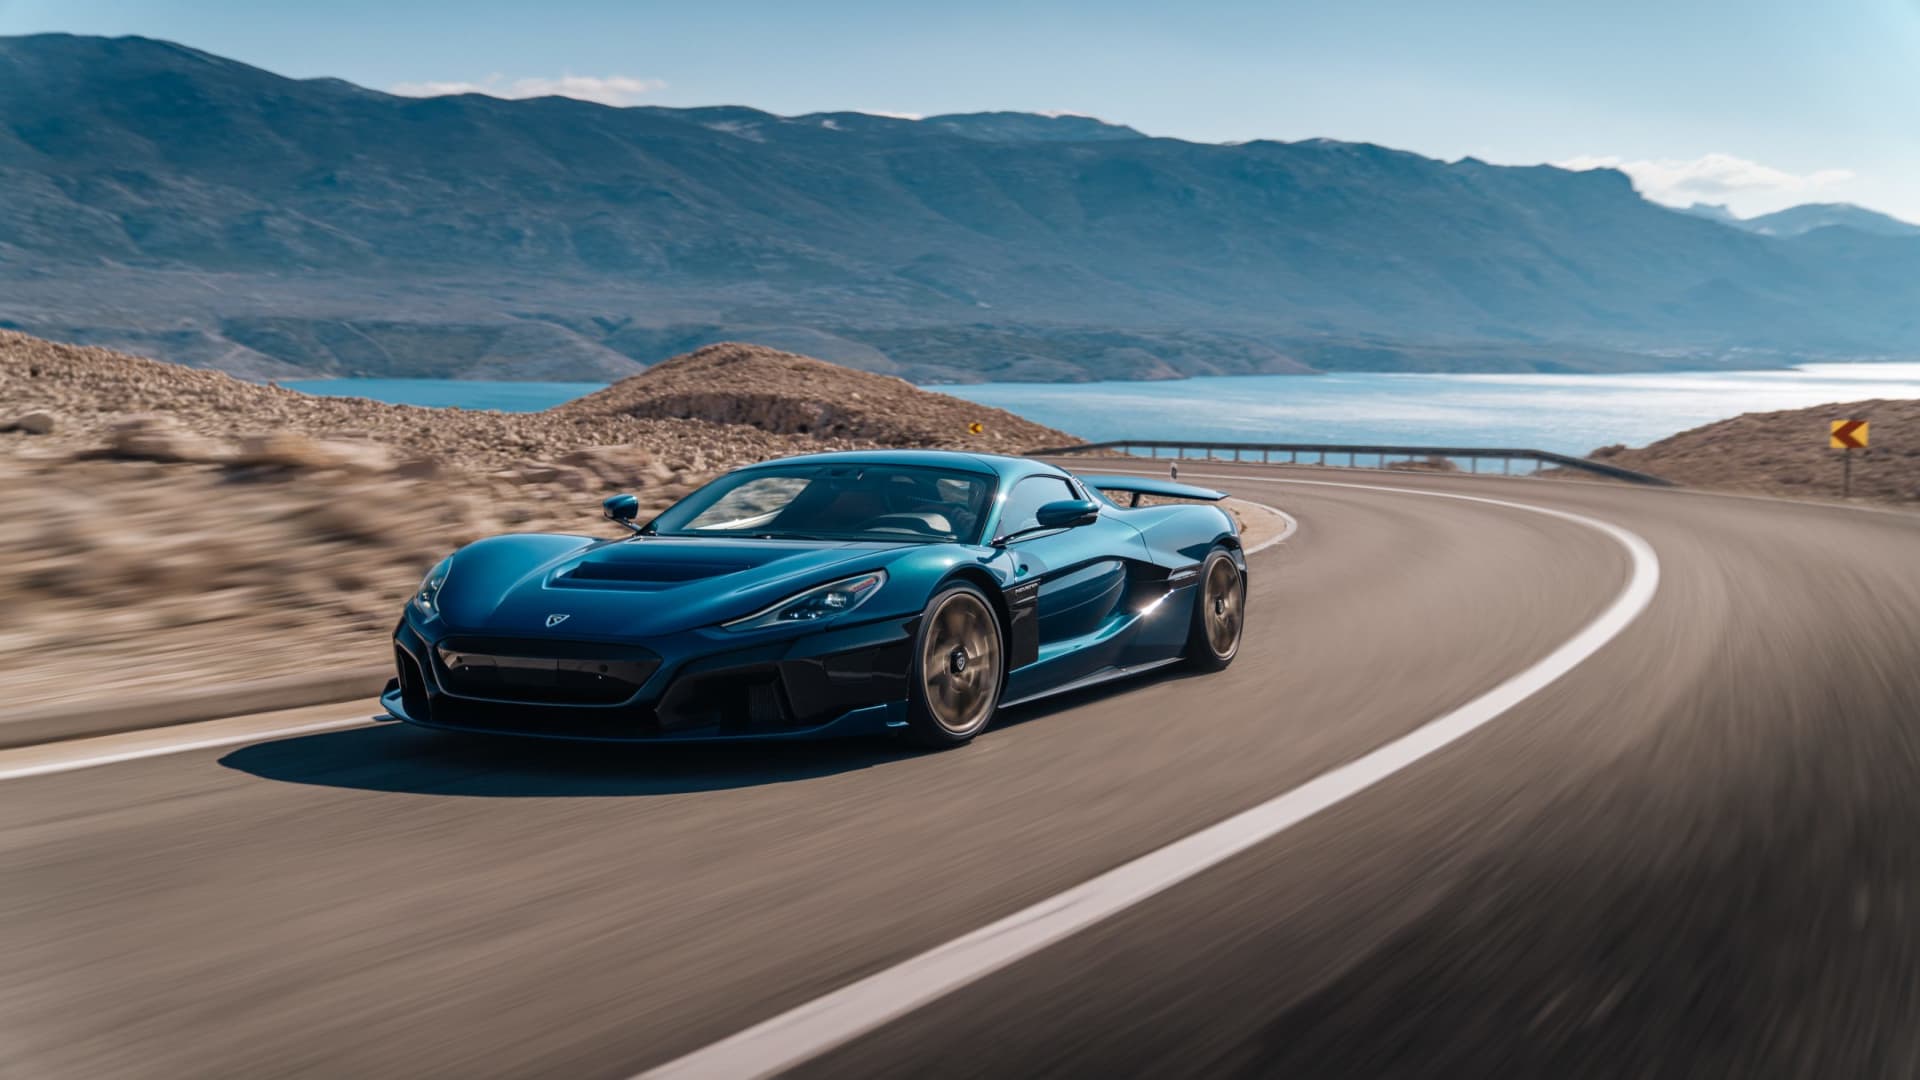 Take a look at the powerful and easy-to-drive $2.1 million Rimac Nevera electric hypercar